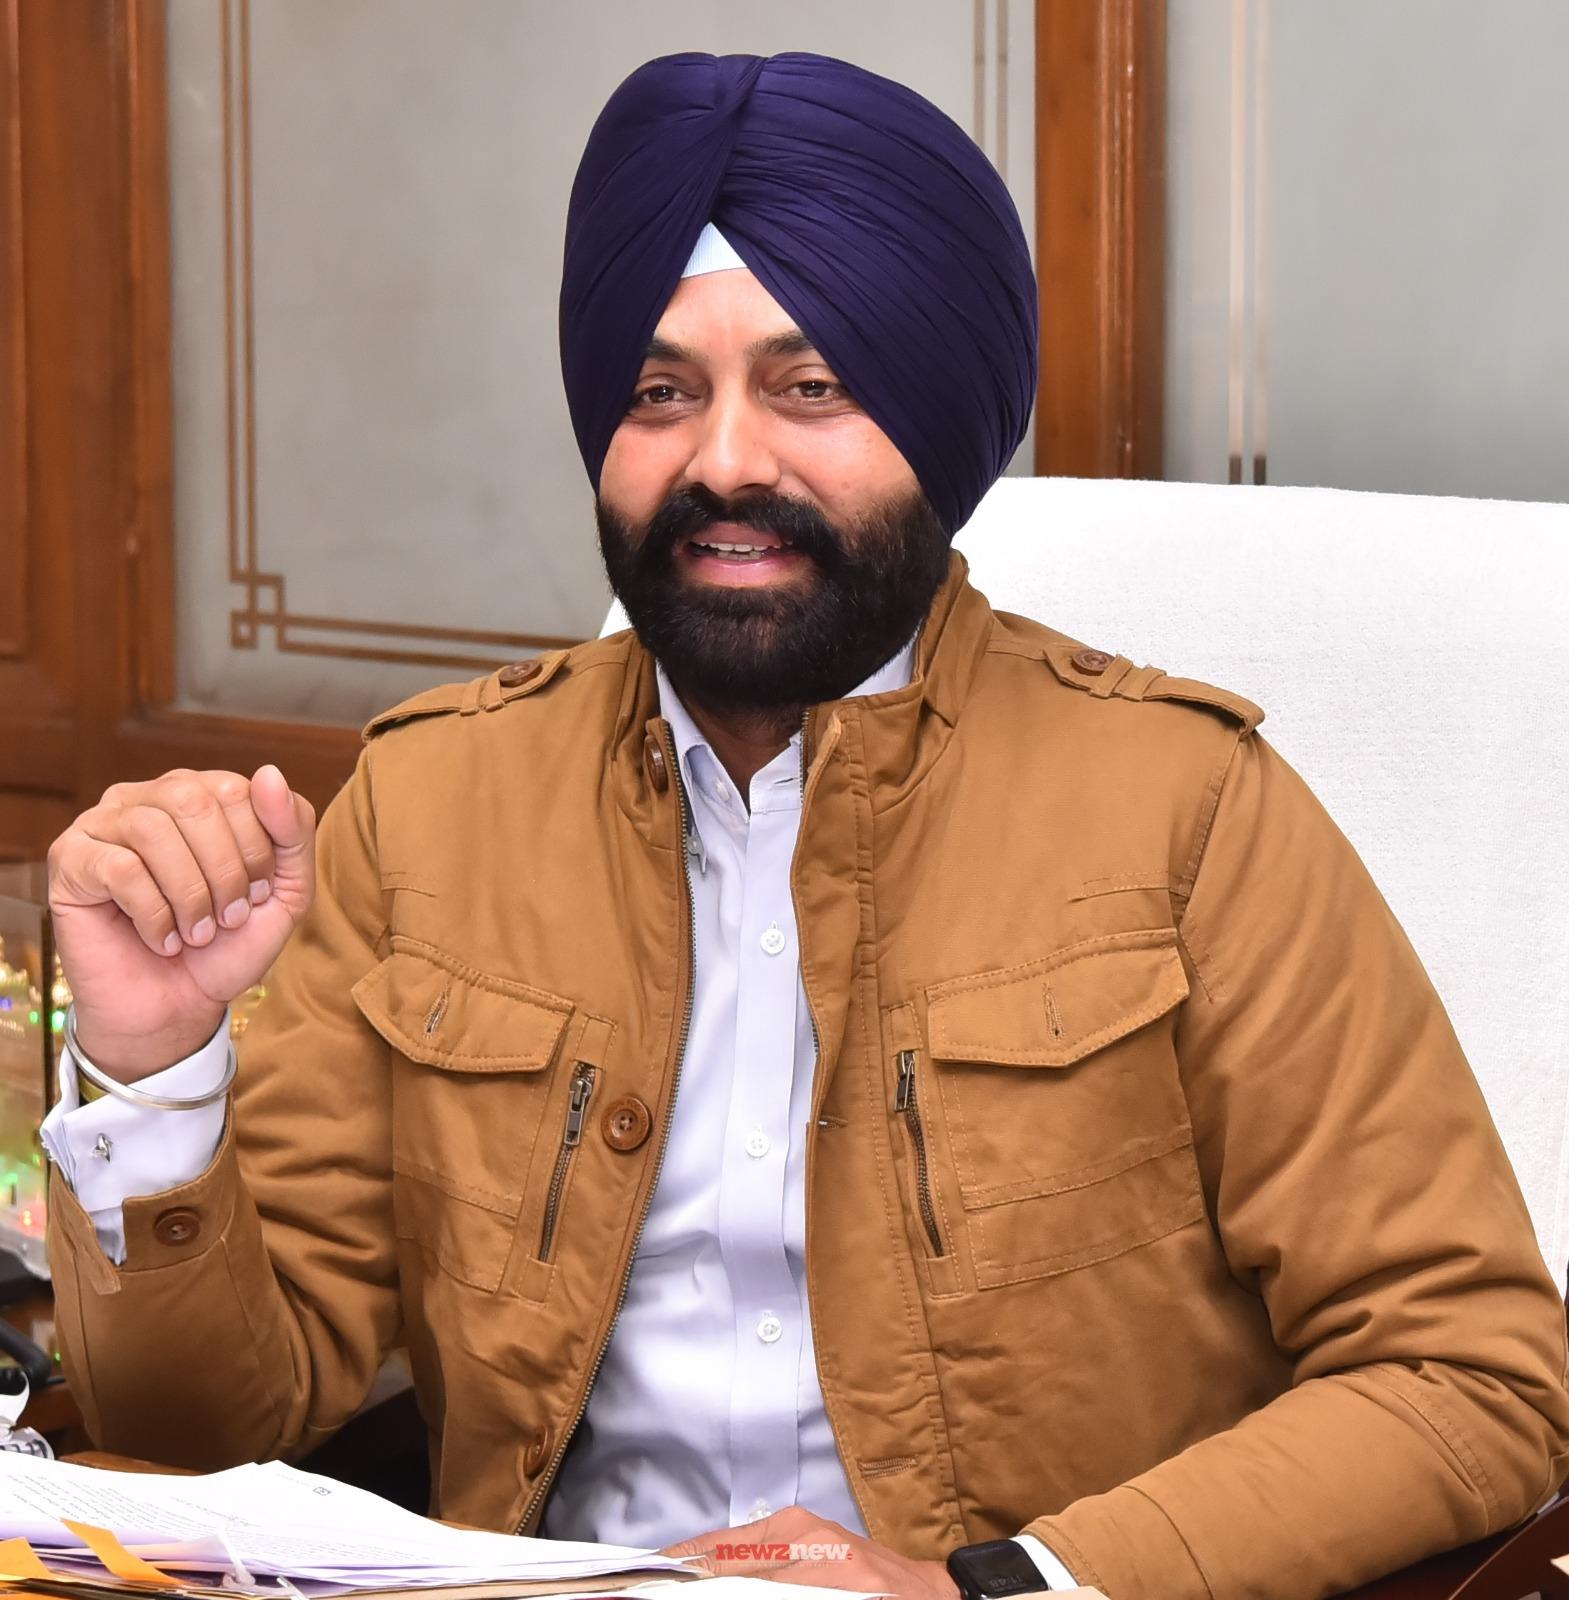 Punjab roadways contractual drivers and conductors to be regularized, assures Laljit Singh Bhullar